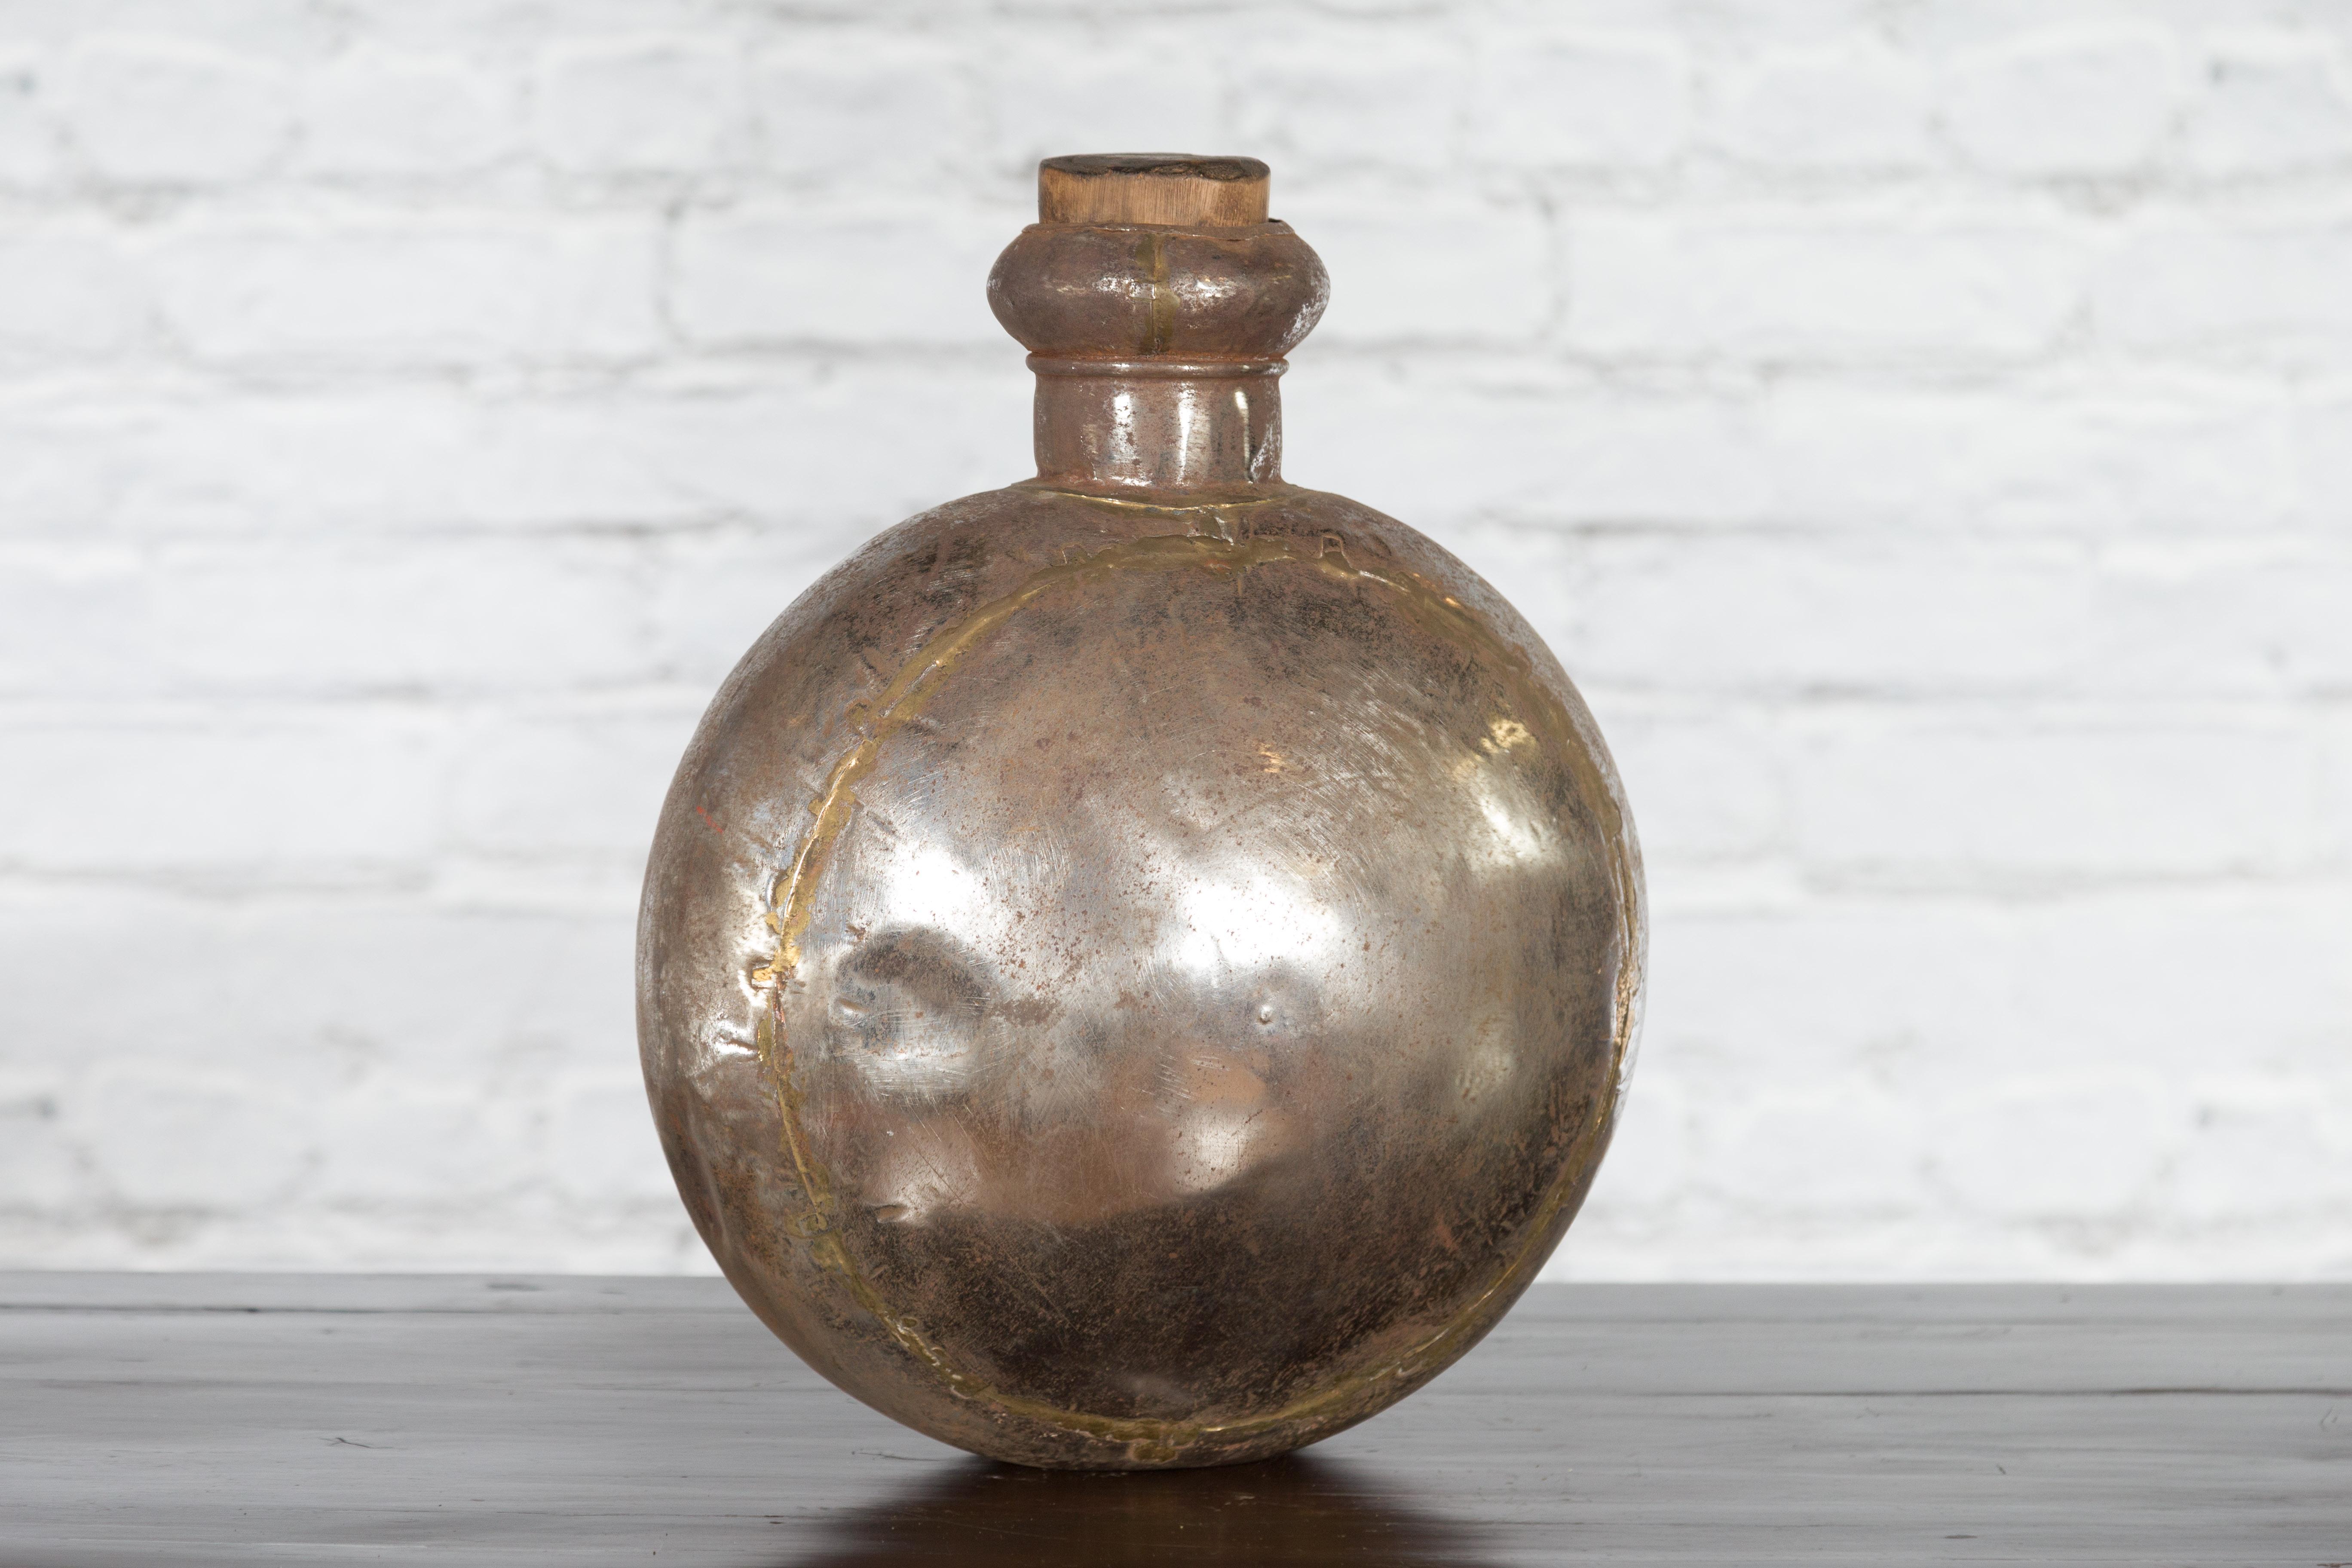 Indian Vintage Metal Water Vase with Cork Style Top and Circular Body For Sale 3